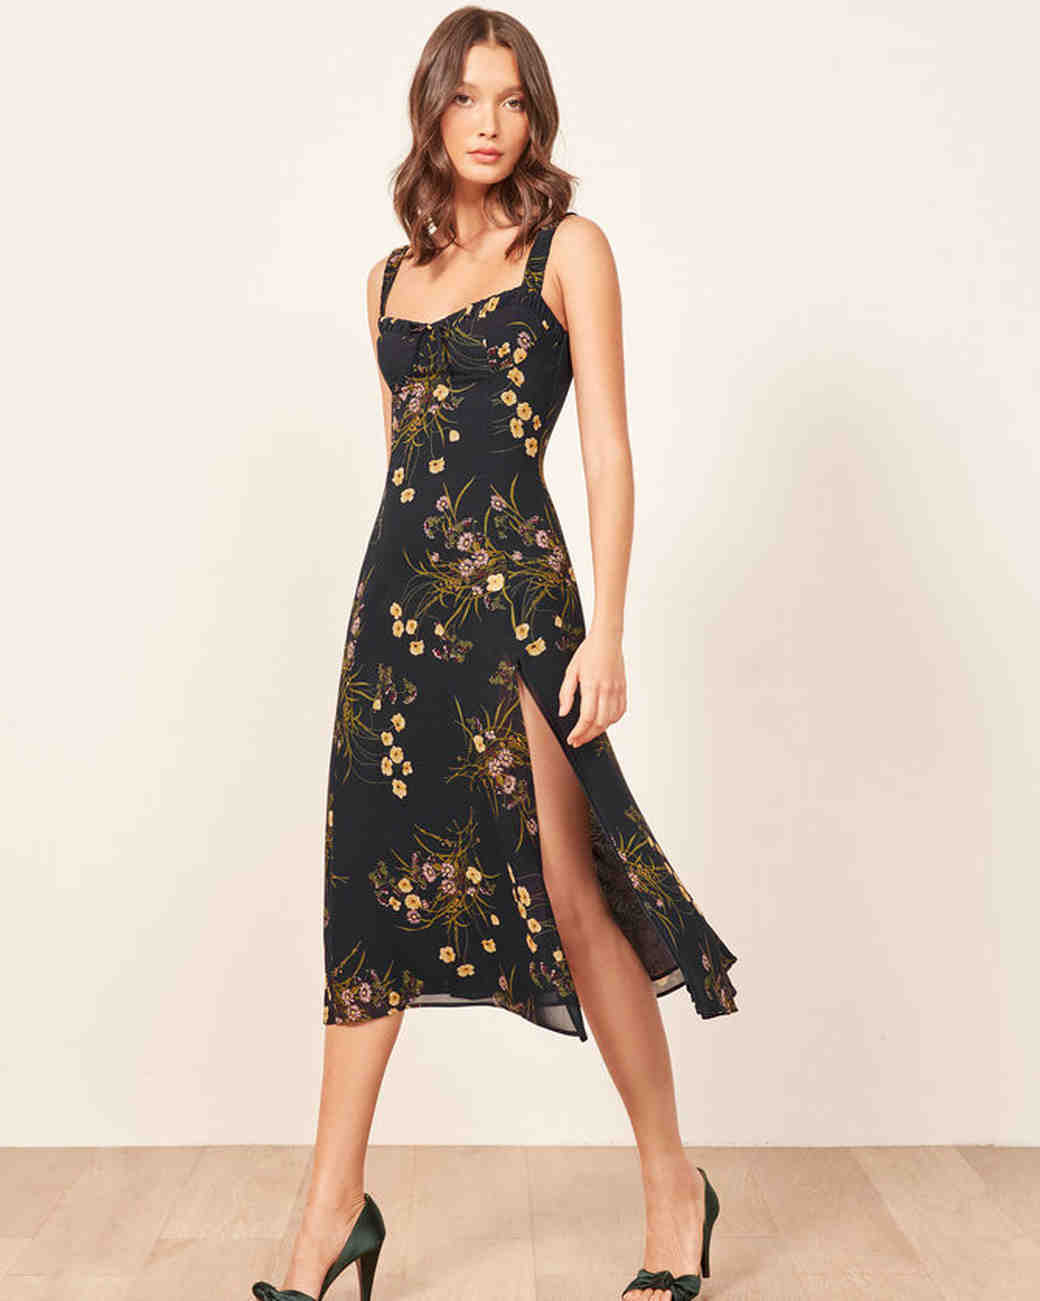 Fall Wedding Guest Dresses
 Beautiful Dresses to Wear as a Wedding Guest This Fall